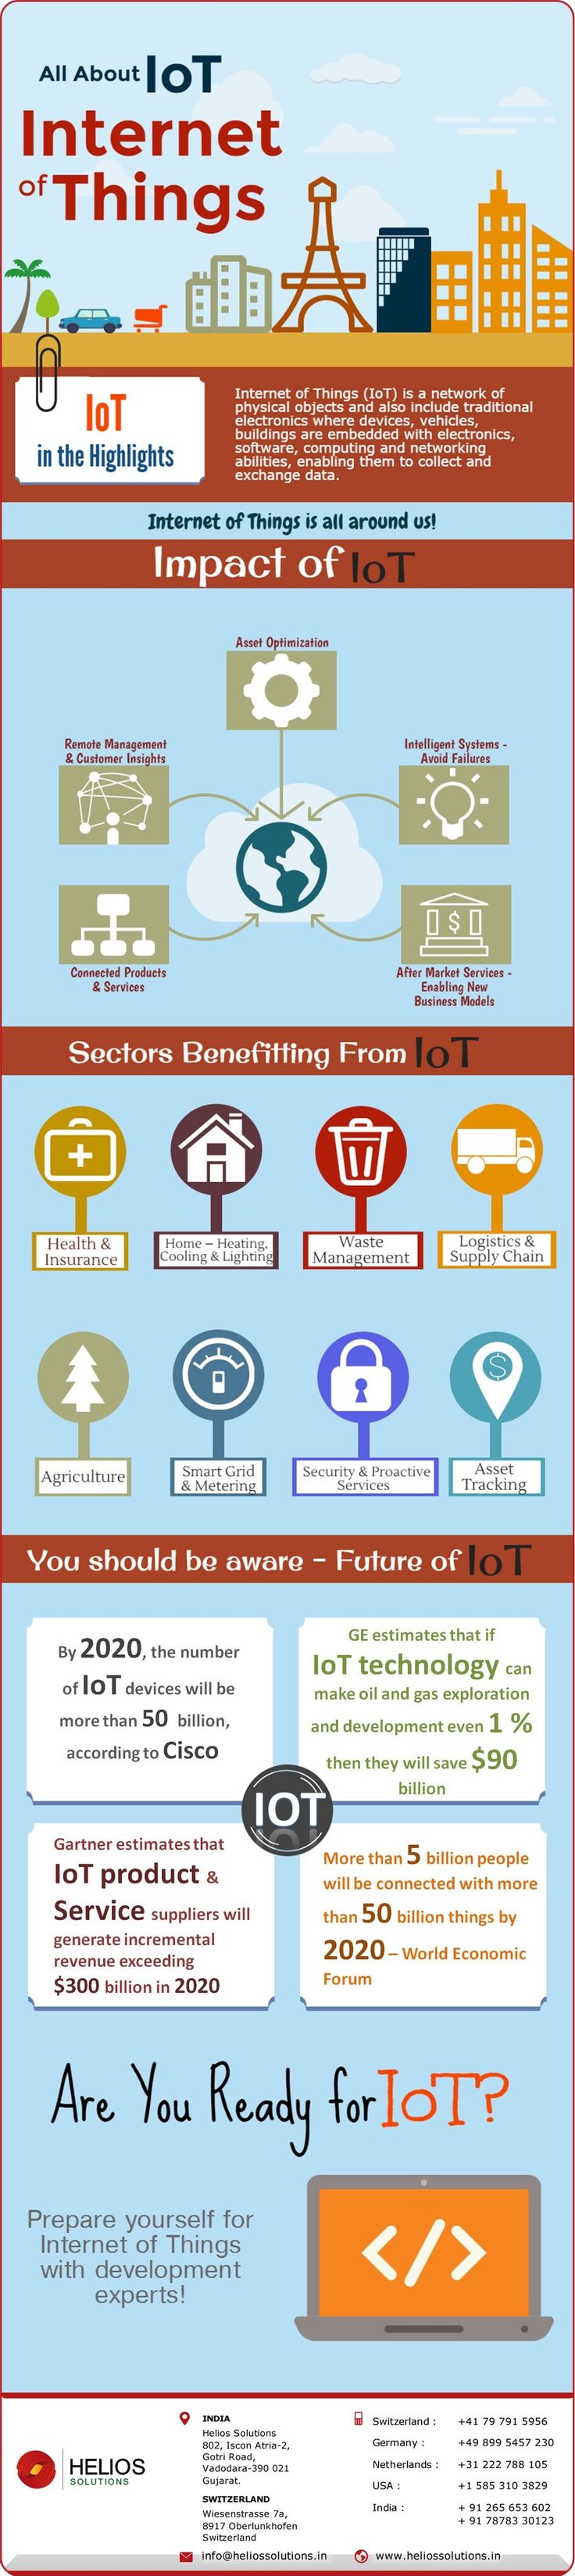 All about IoT - Internet of Things